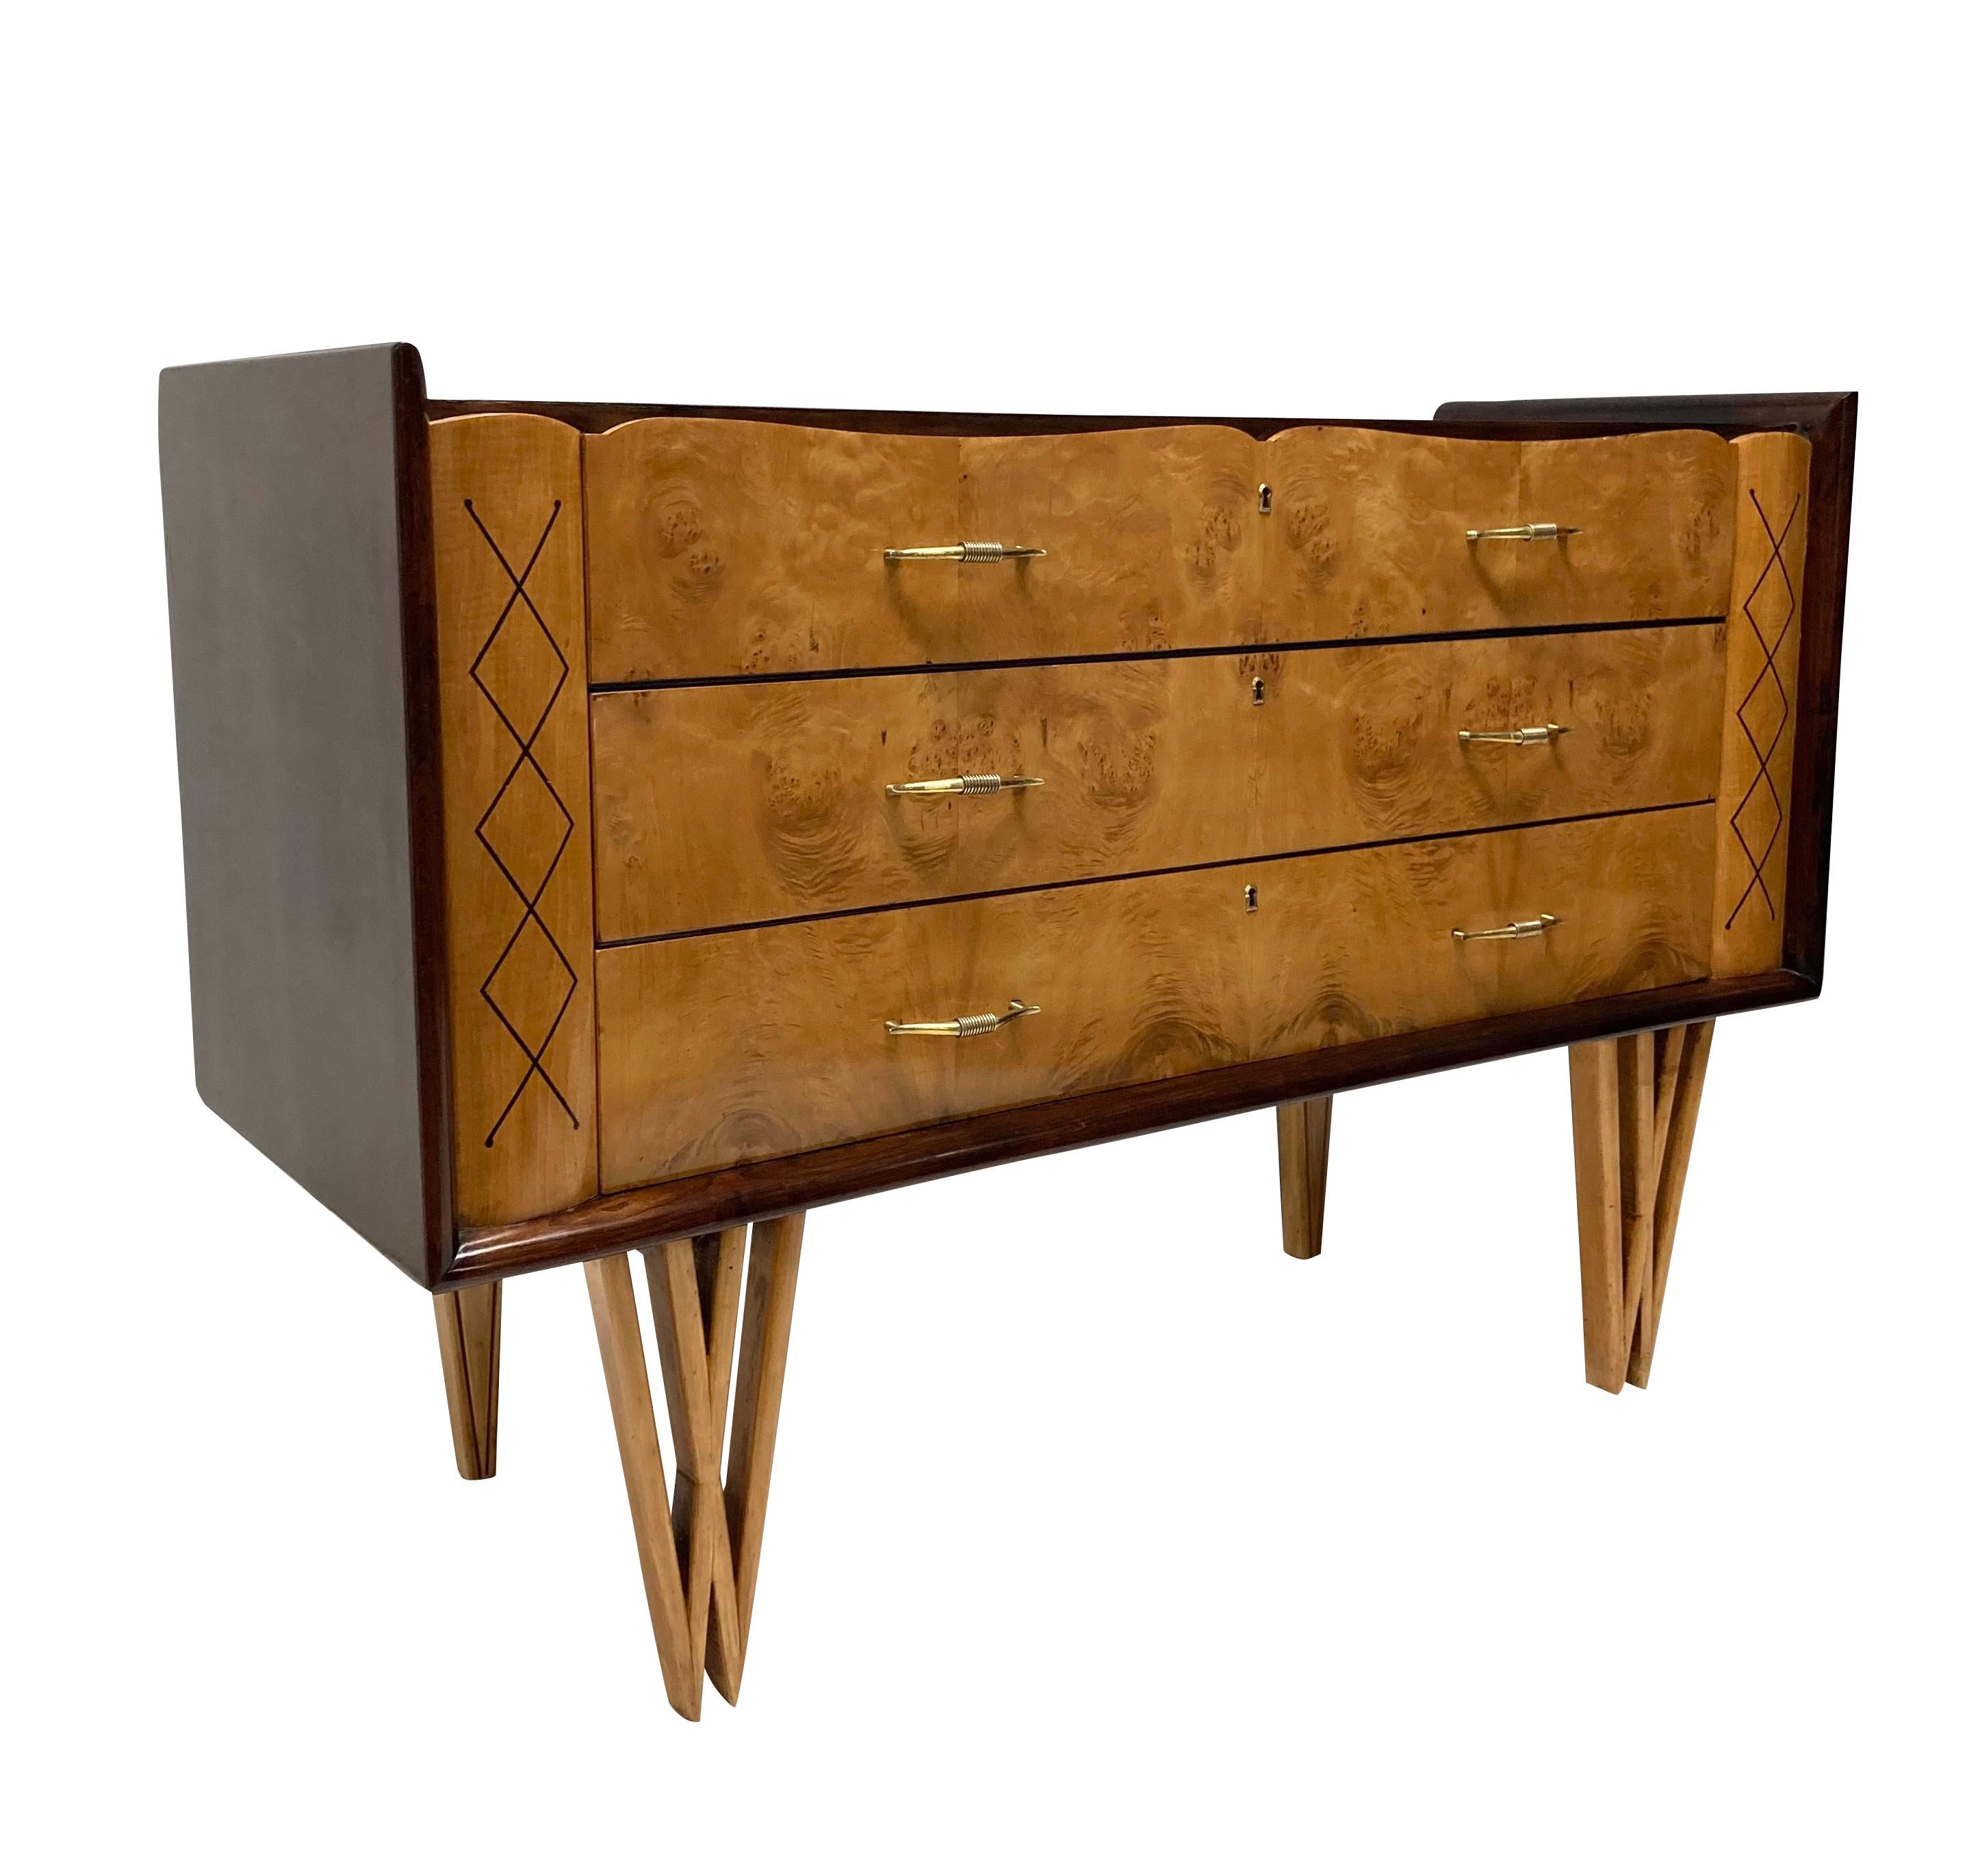 A stylish French mid-century commode of unusual design. With three drawers in walnut, each with elegant brass handles. The commode sits on double 'v' shaped front legs in fruitwood and the drawers each flanked by a hand painted design.